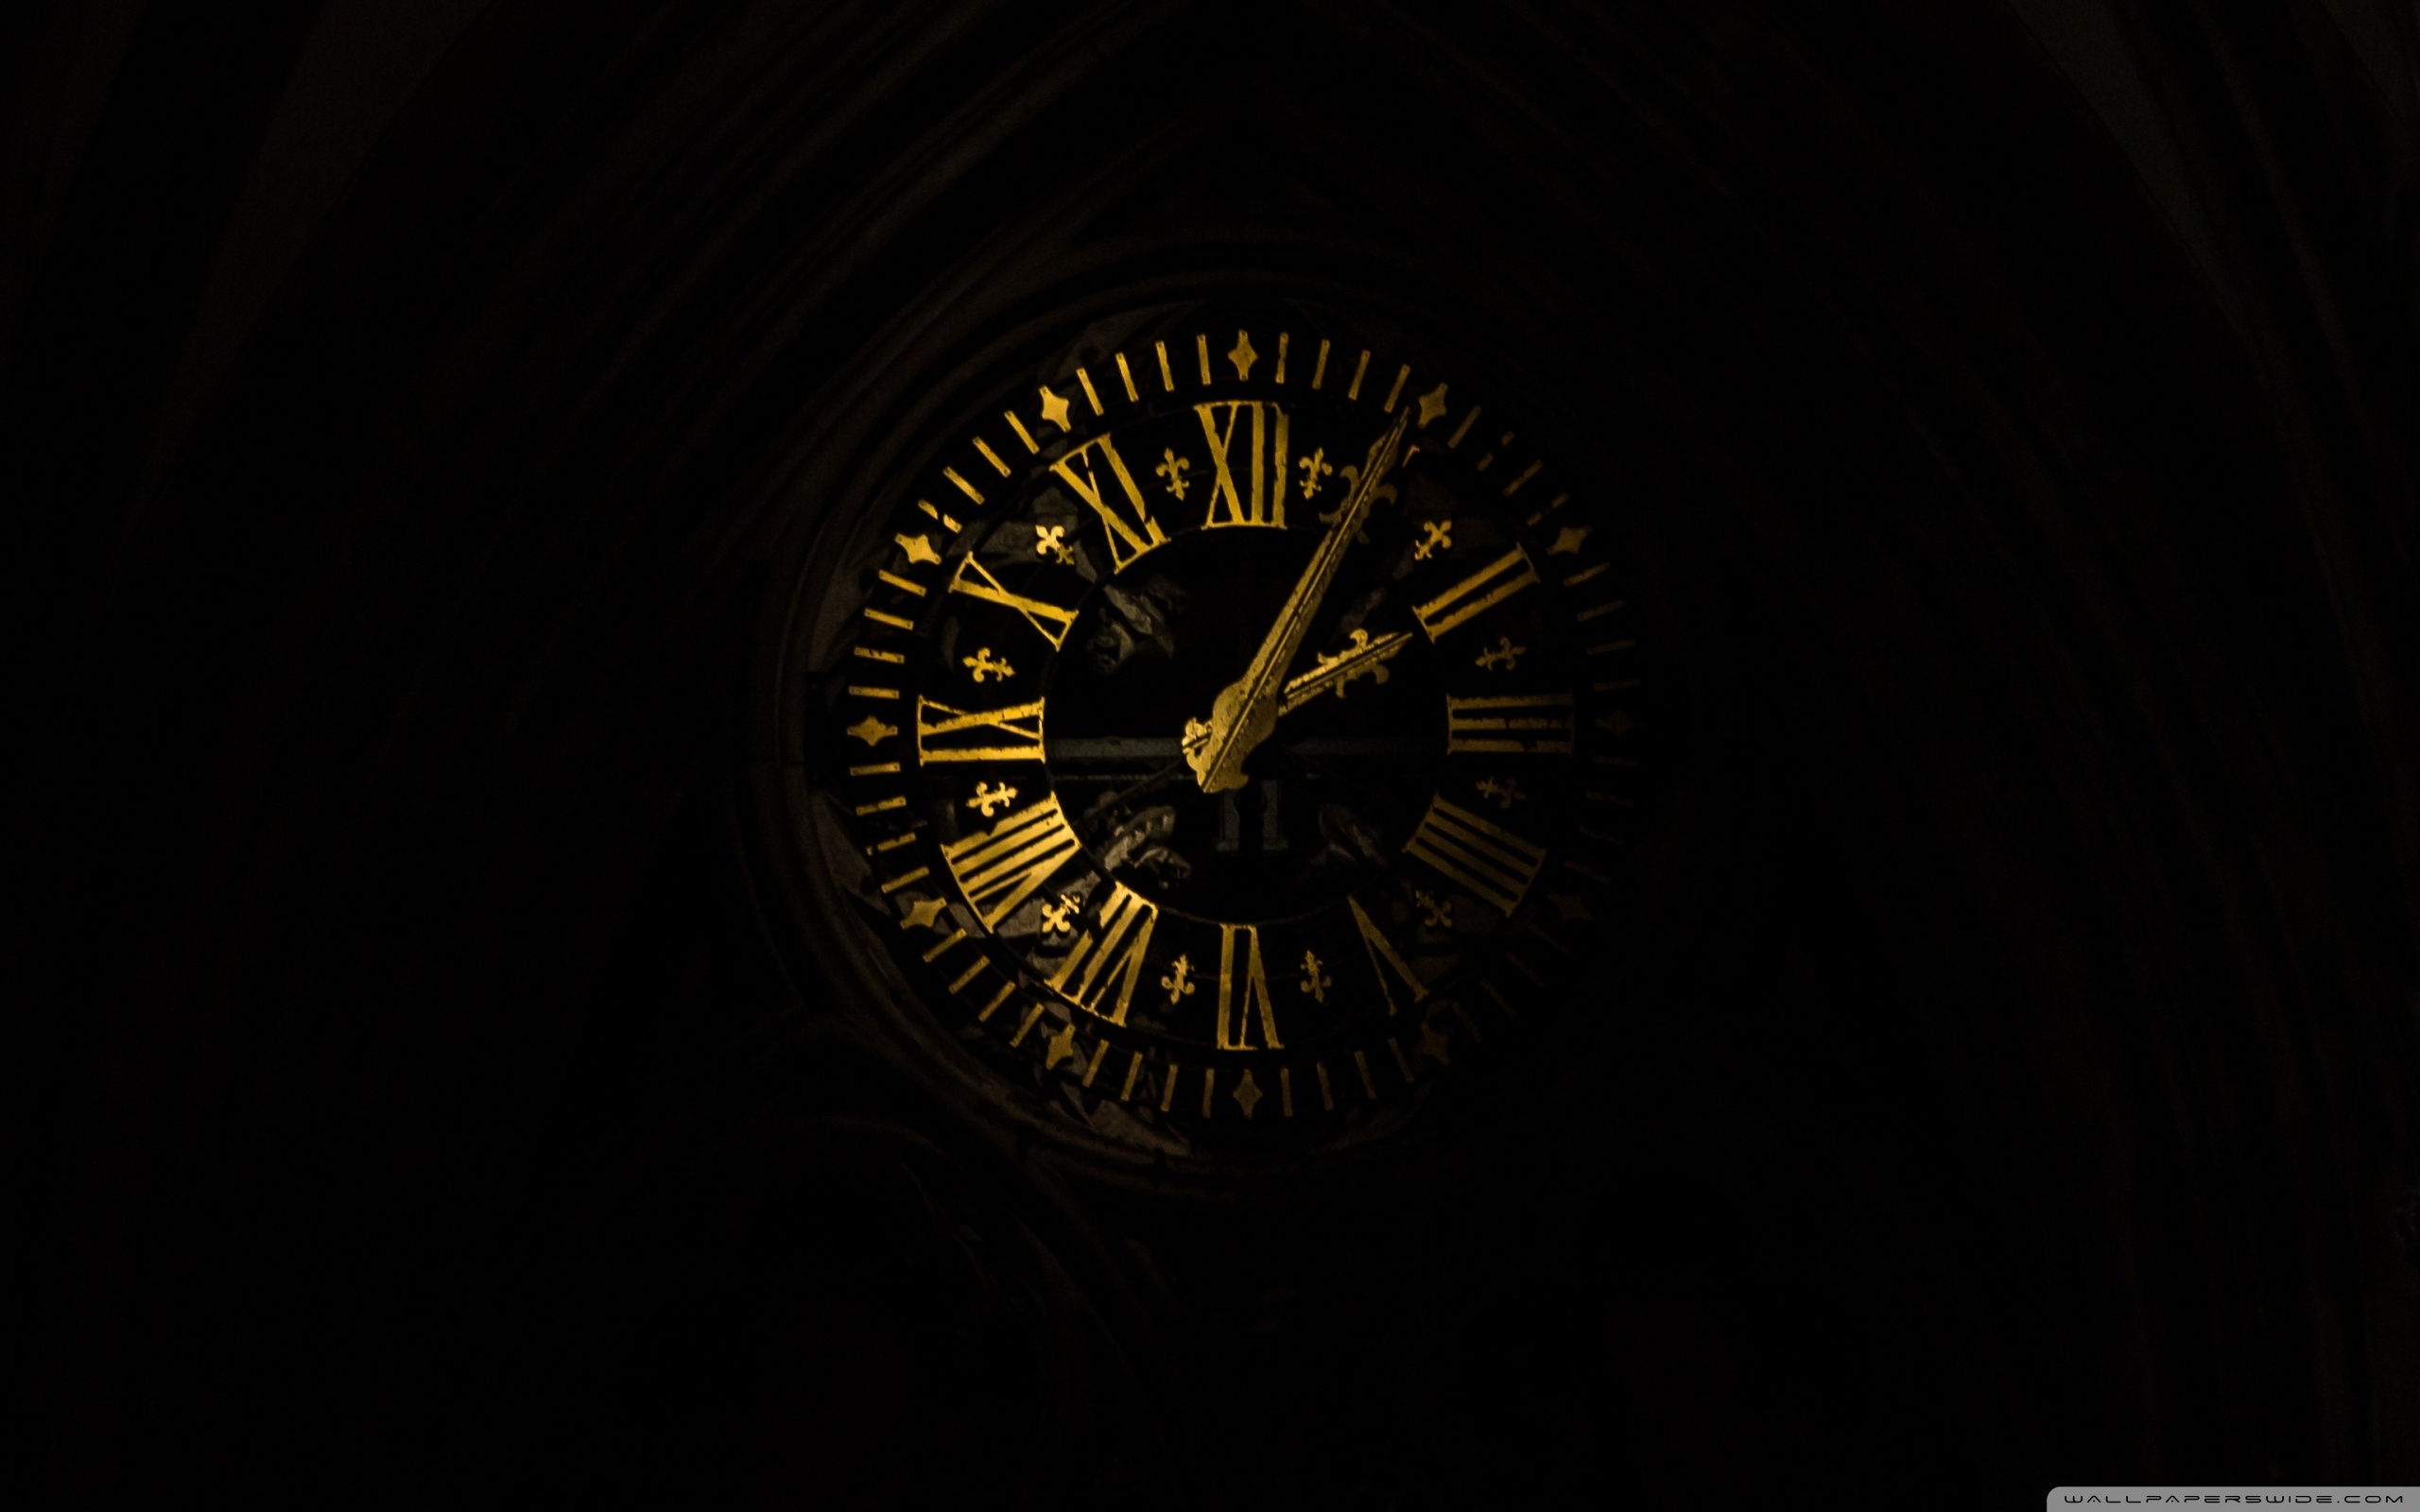 Analog Clock Live Wallpaper - Apps on Google Play